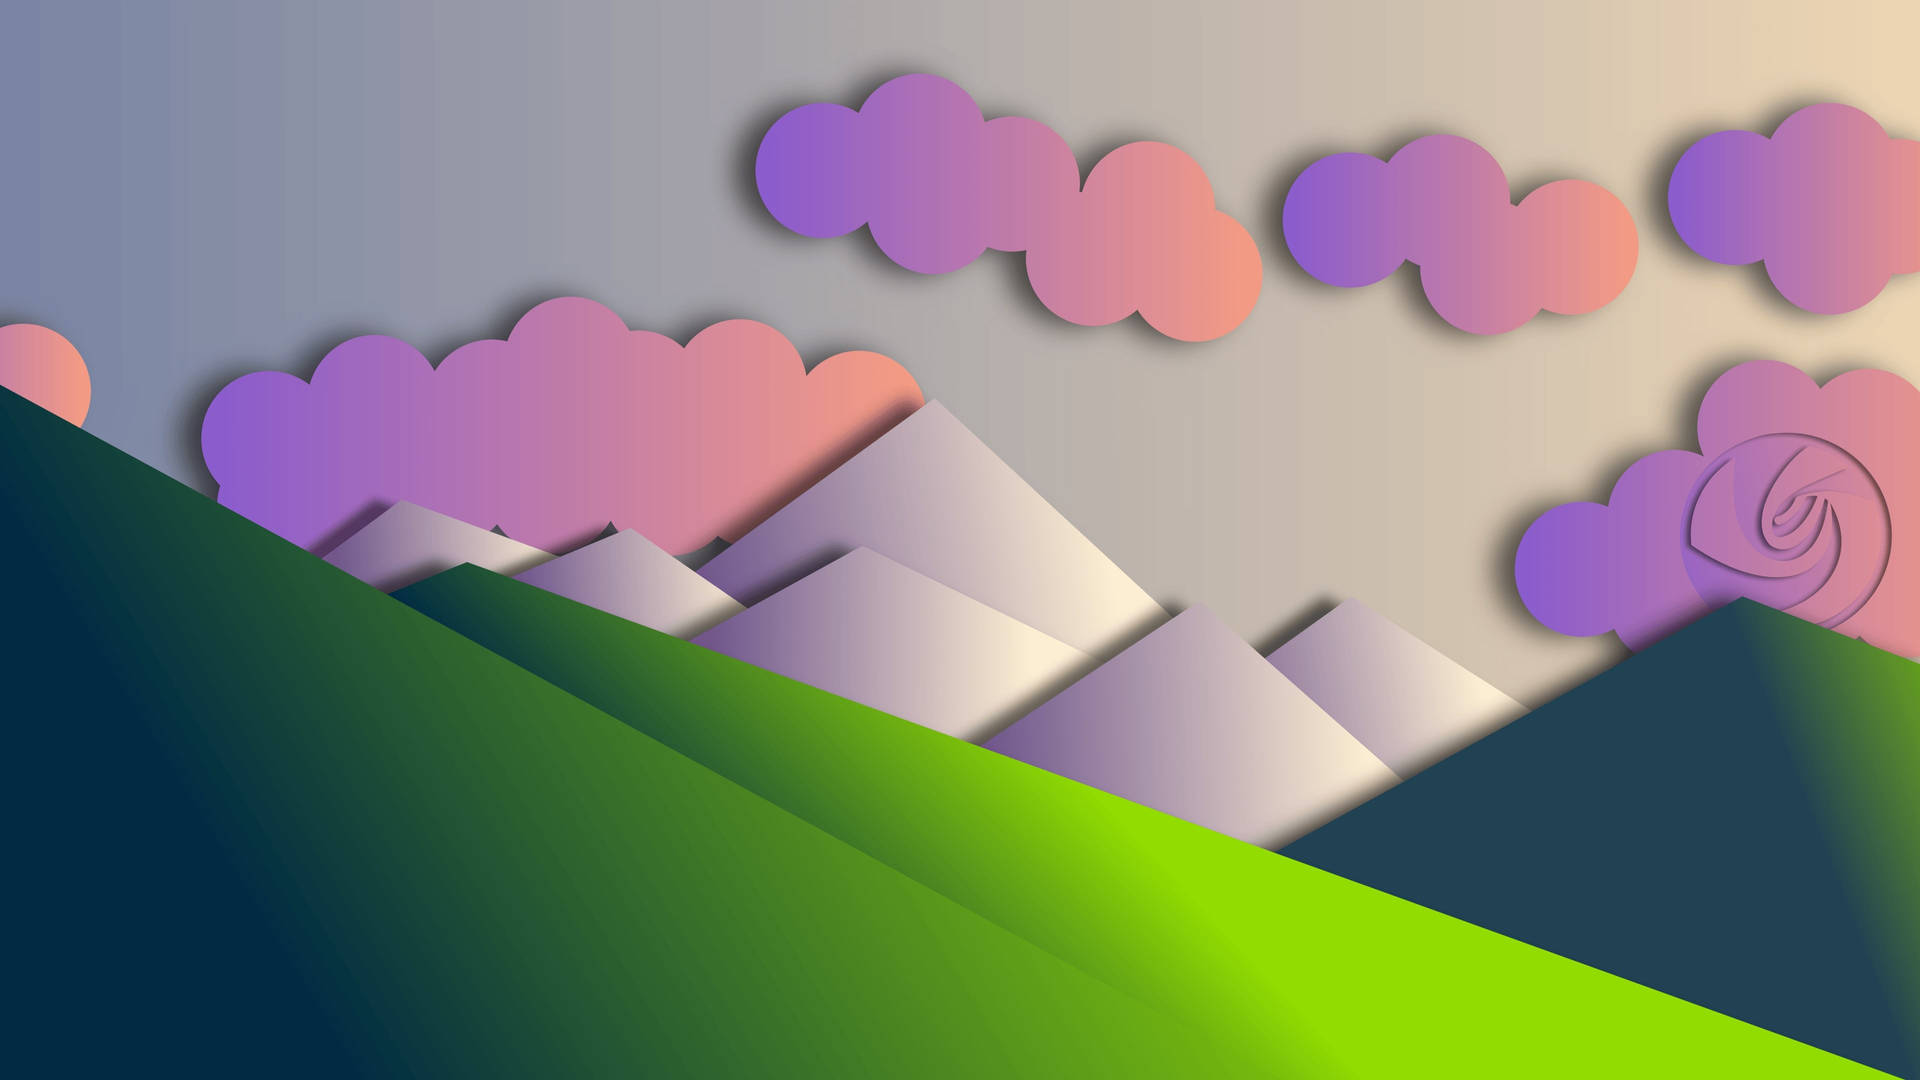 Clouds And Mountains Material Design Wallpaper